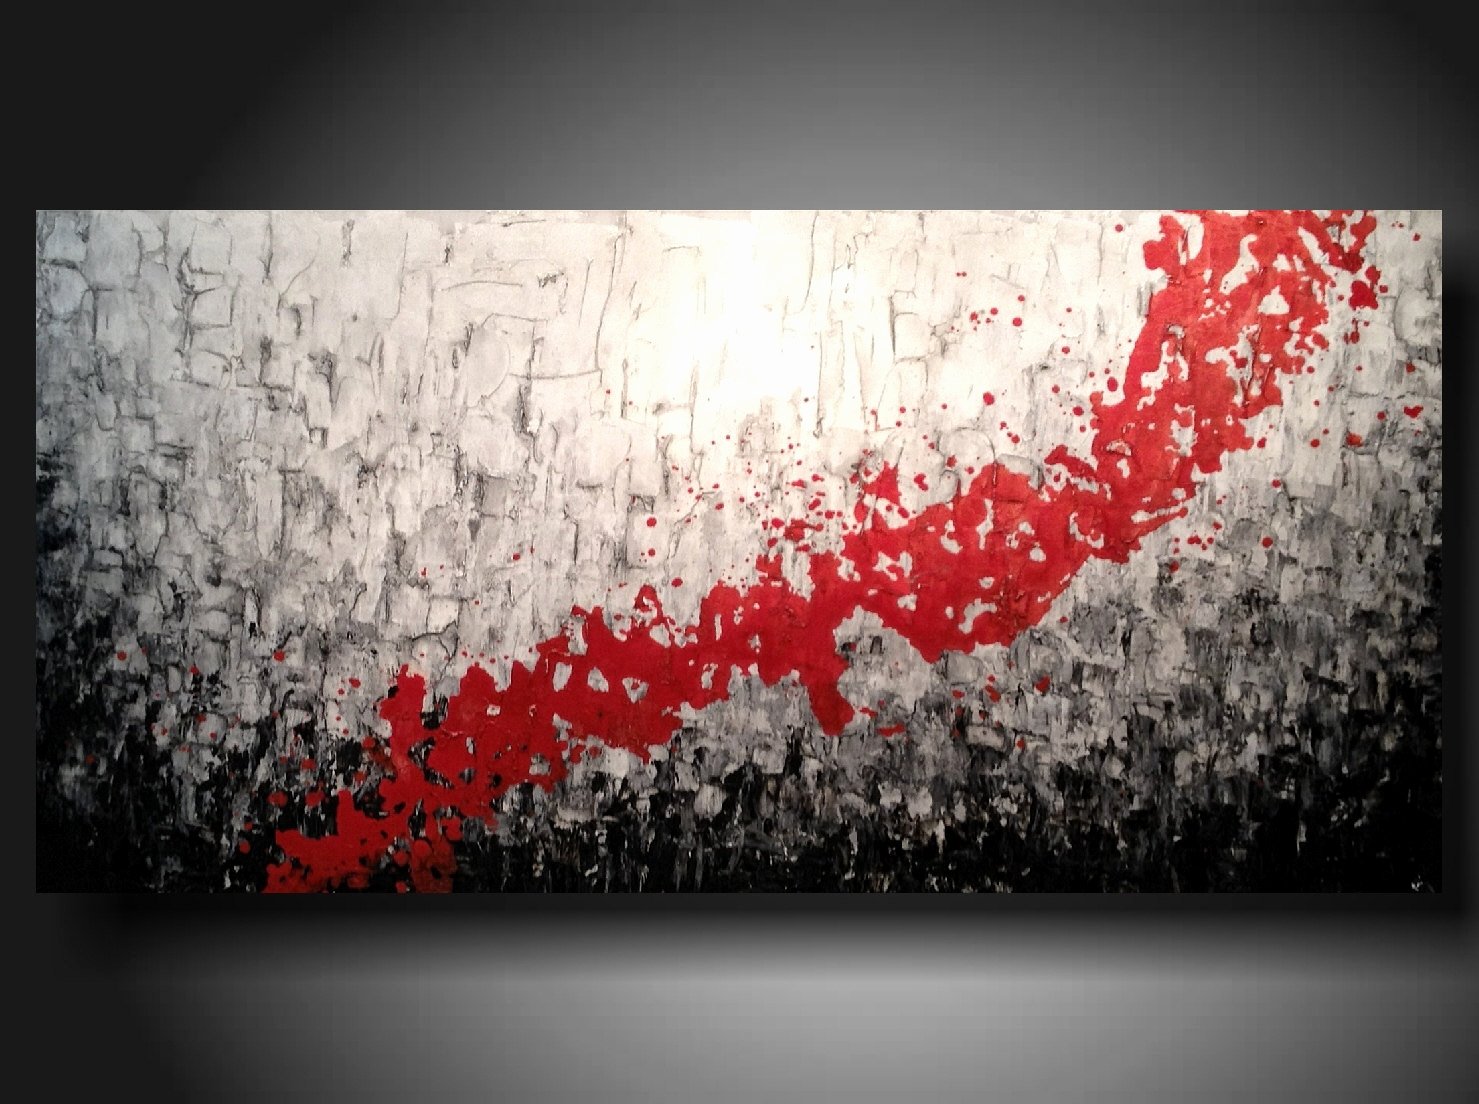 Black White Abstract Painting Lovely Art original Abstract Painting Modern Black White Red